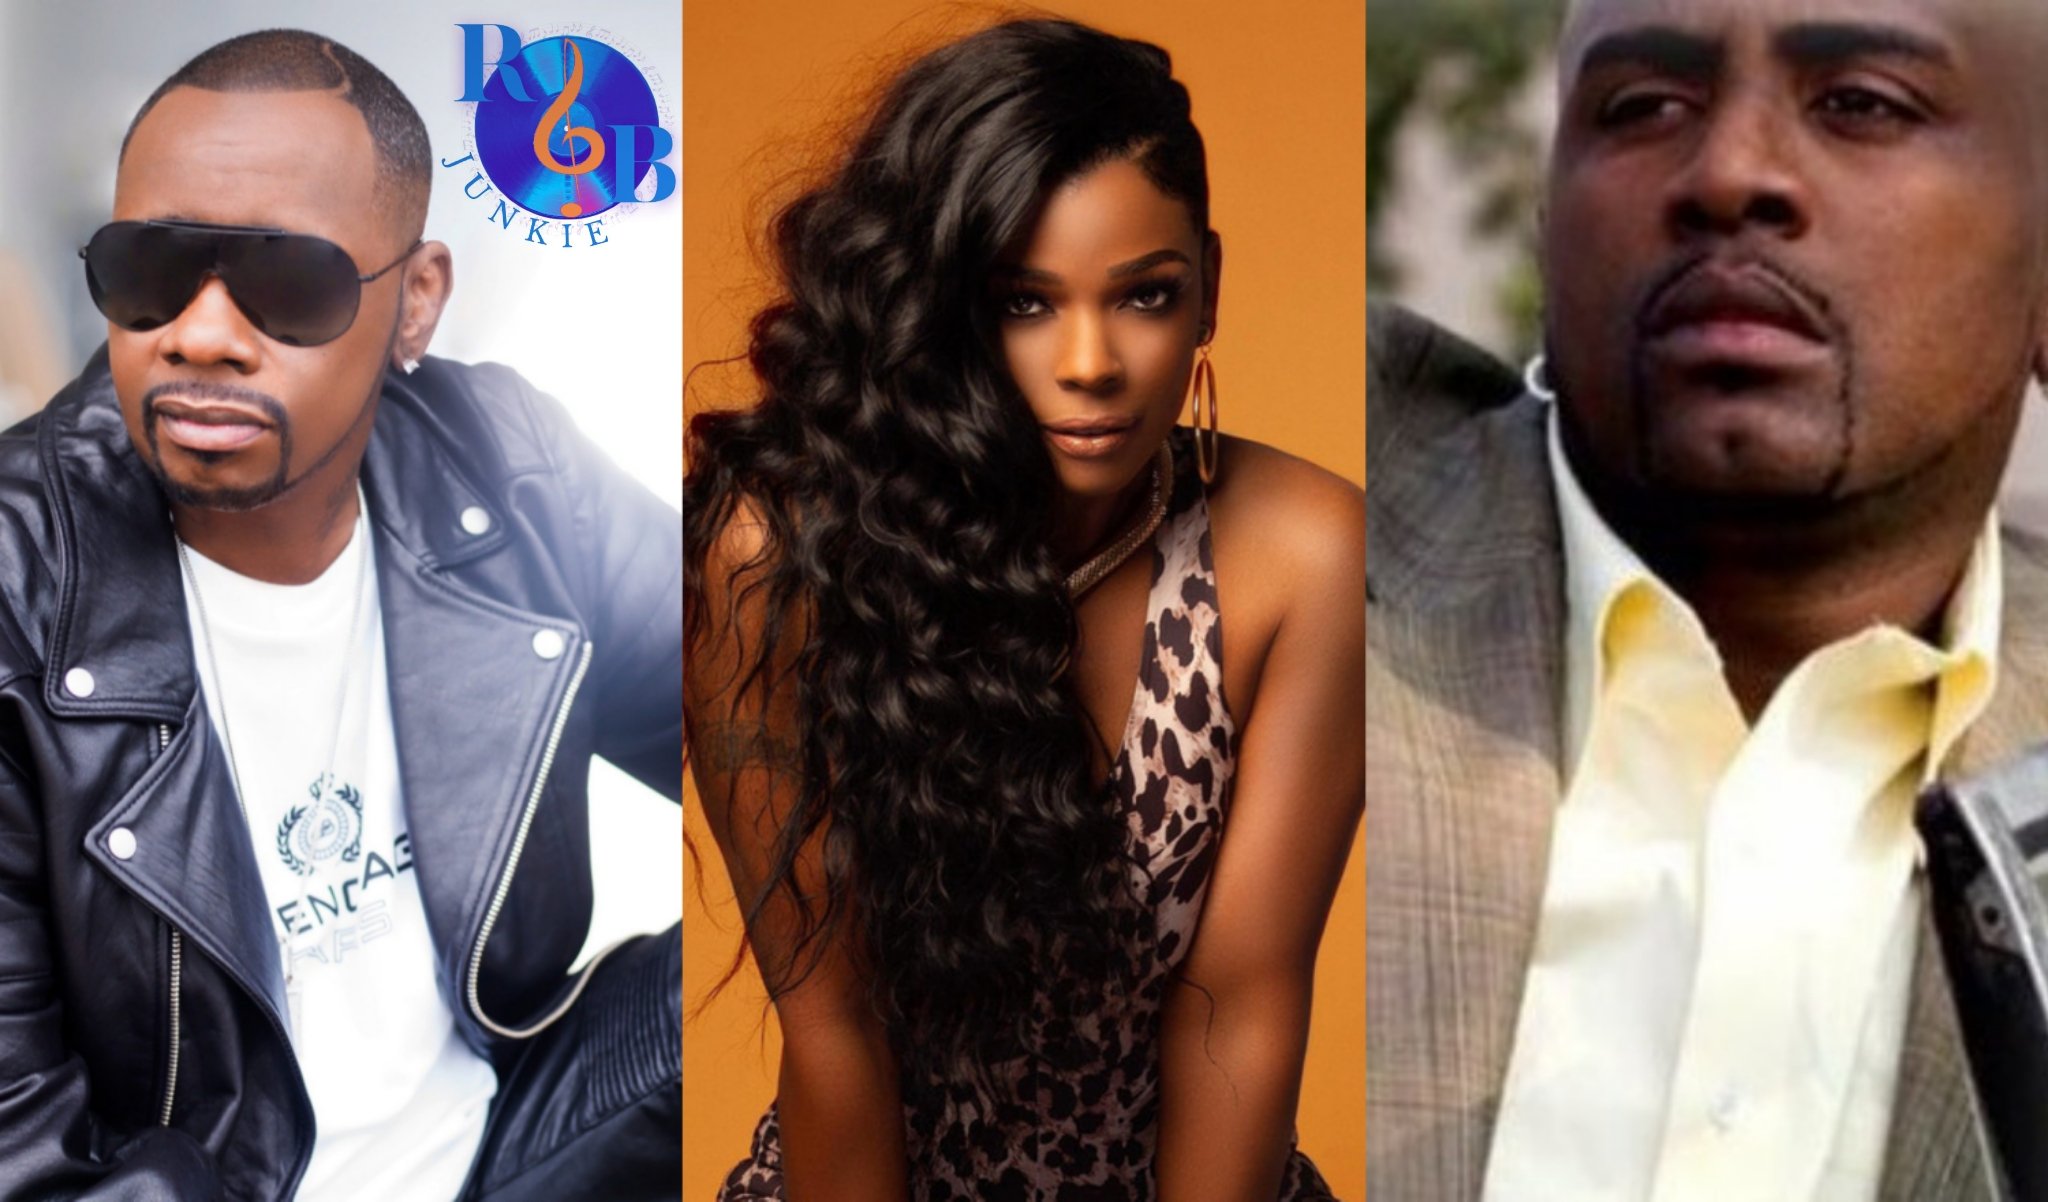 Happy Birthday shout-outs to K-Ci Hailey, Syleena Johnson and the late Tony Thompson (of Hi-Five) 